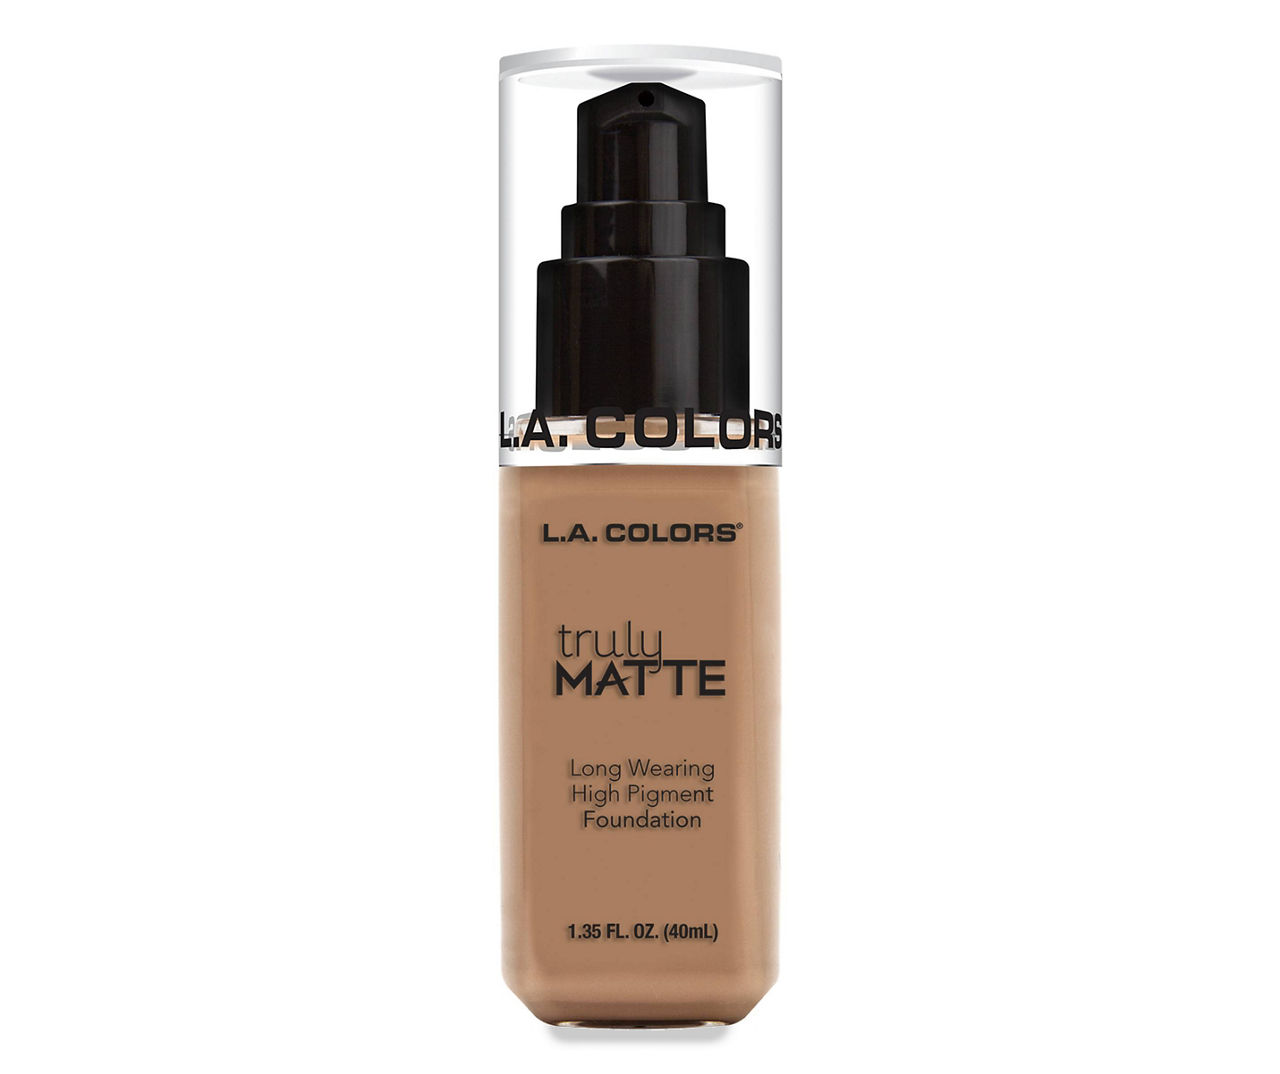 Truly Matte Foundation in Cool Beige